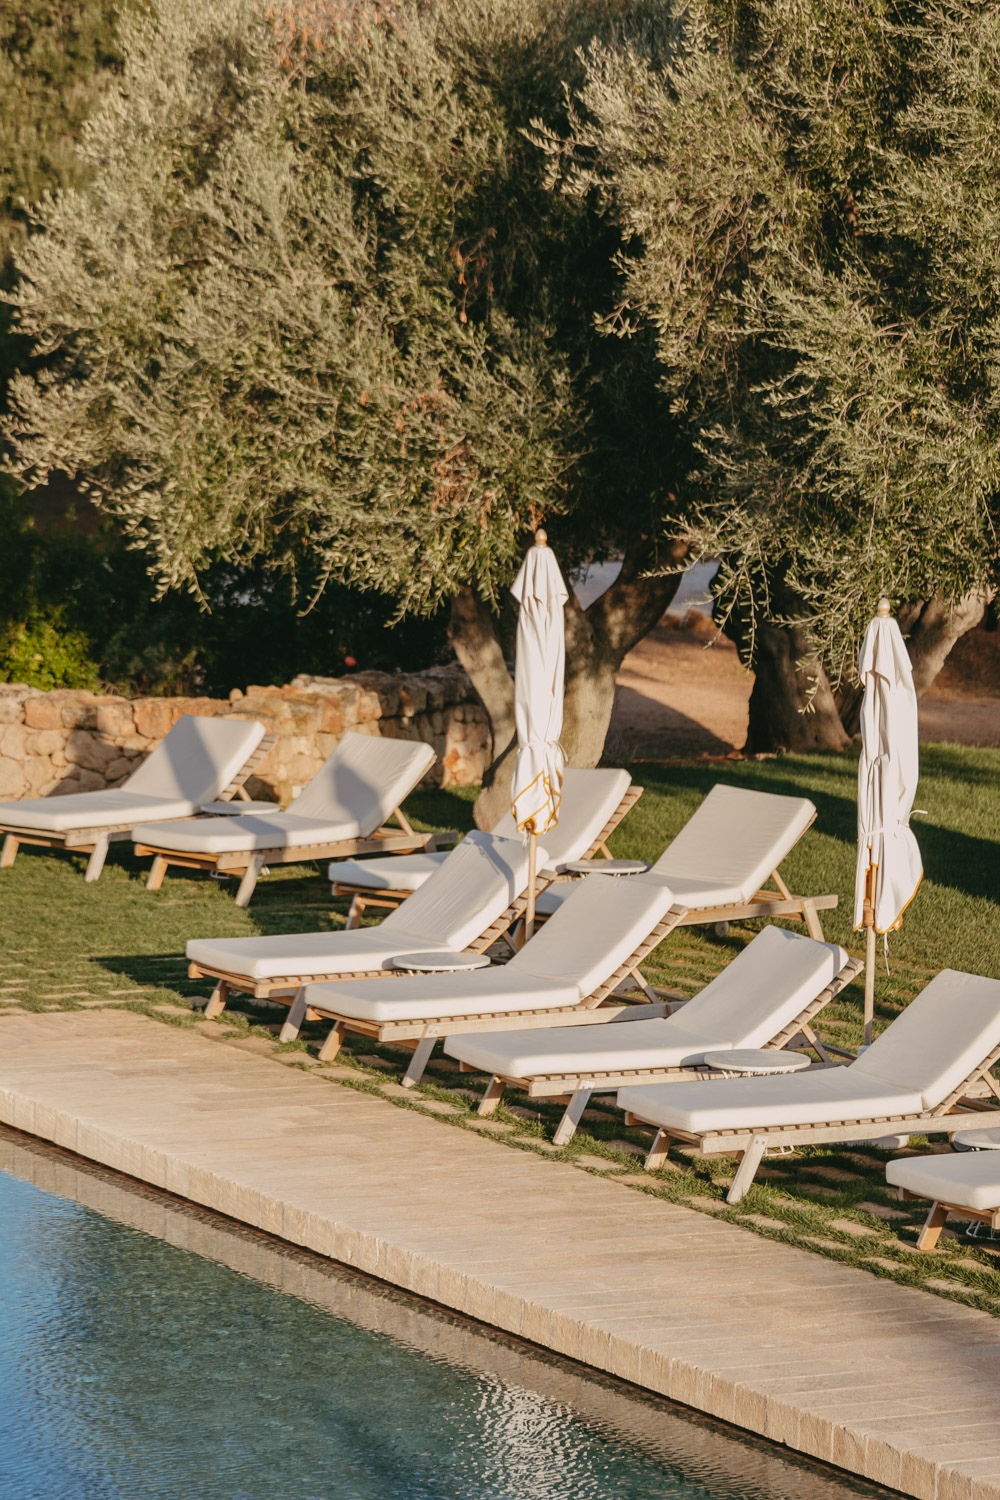 sunloungers by the pool with olive trees in the background